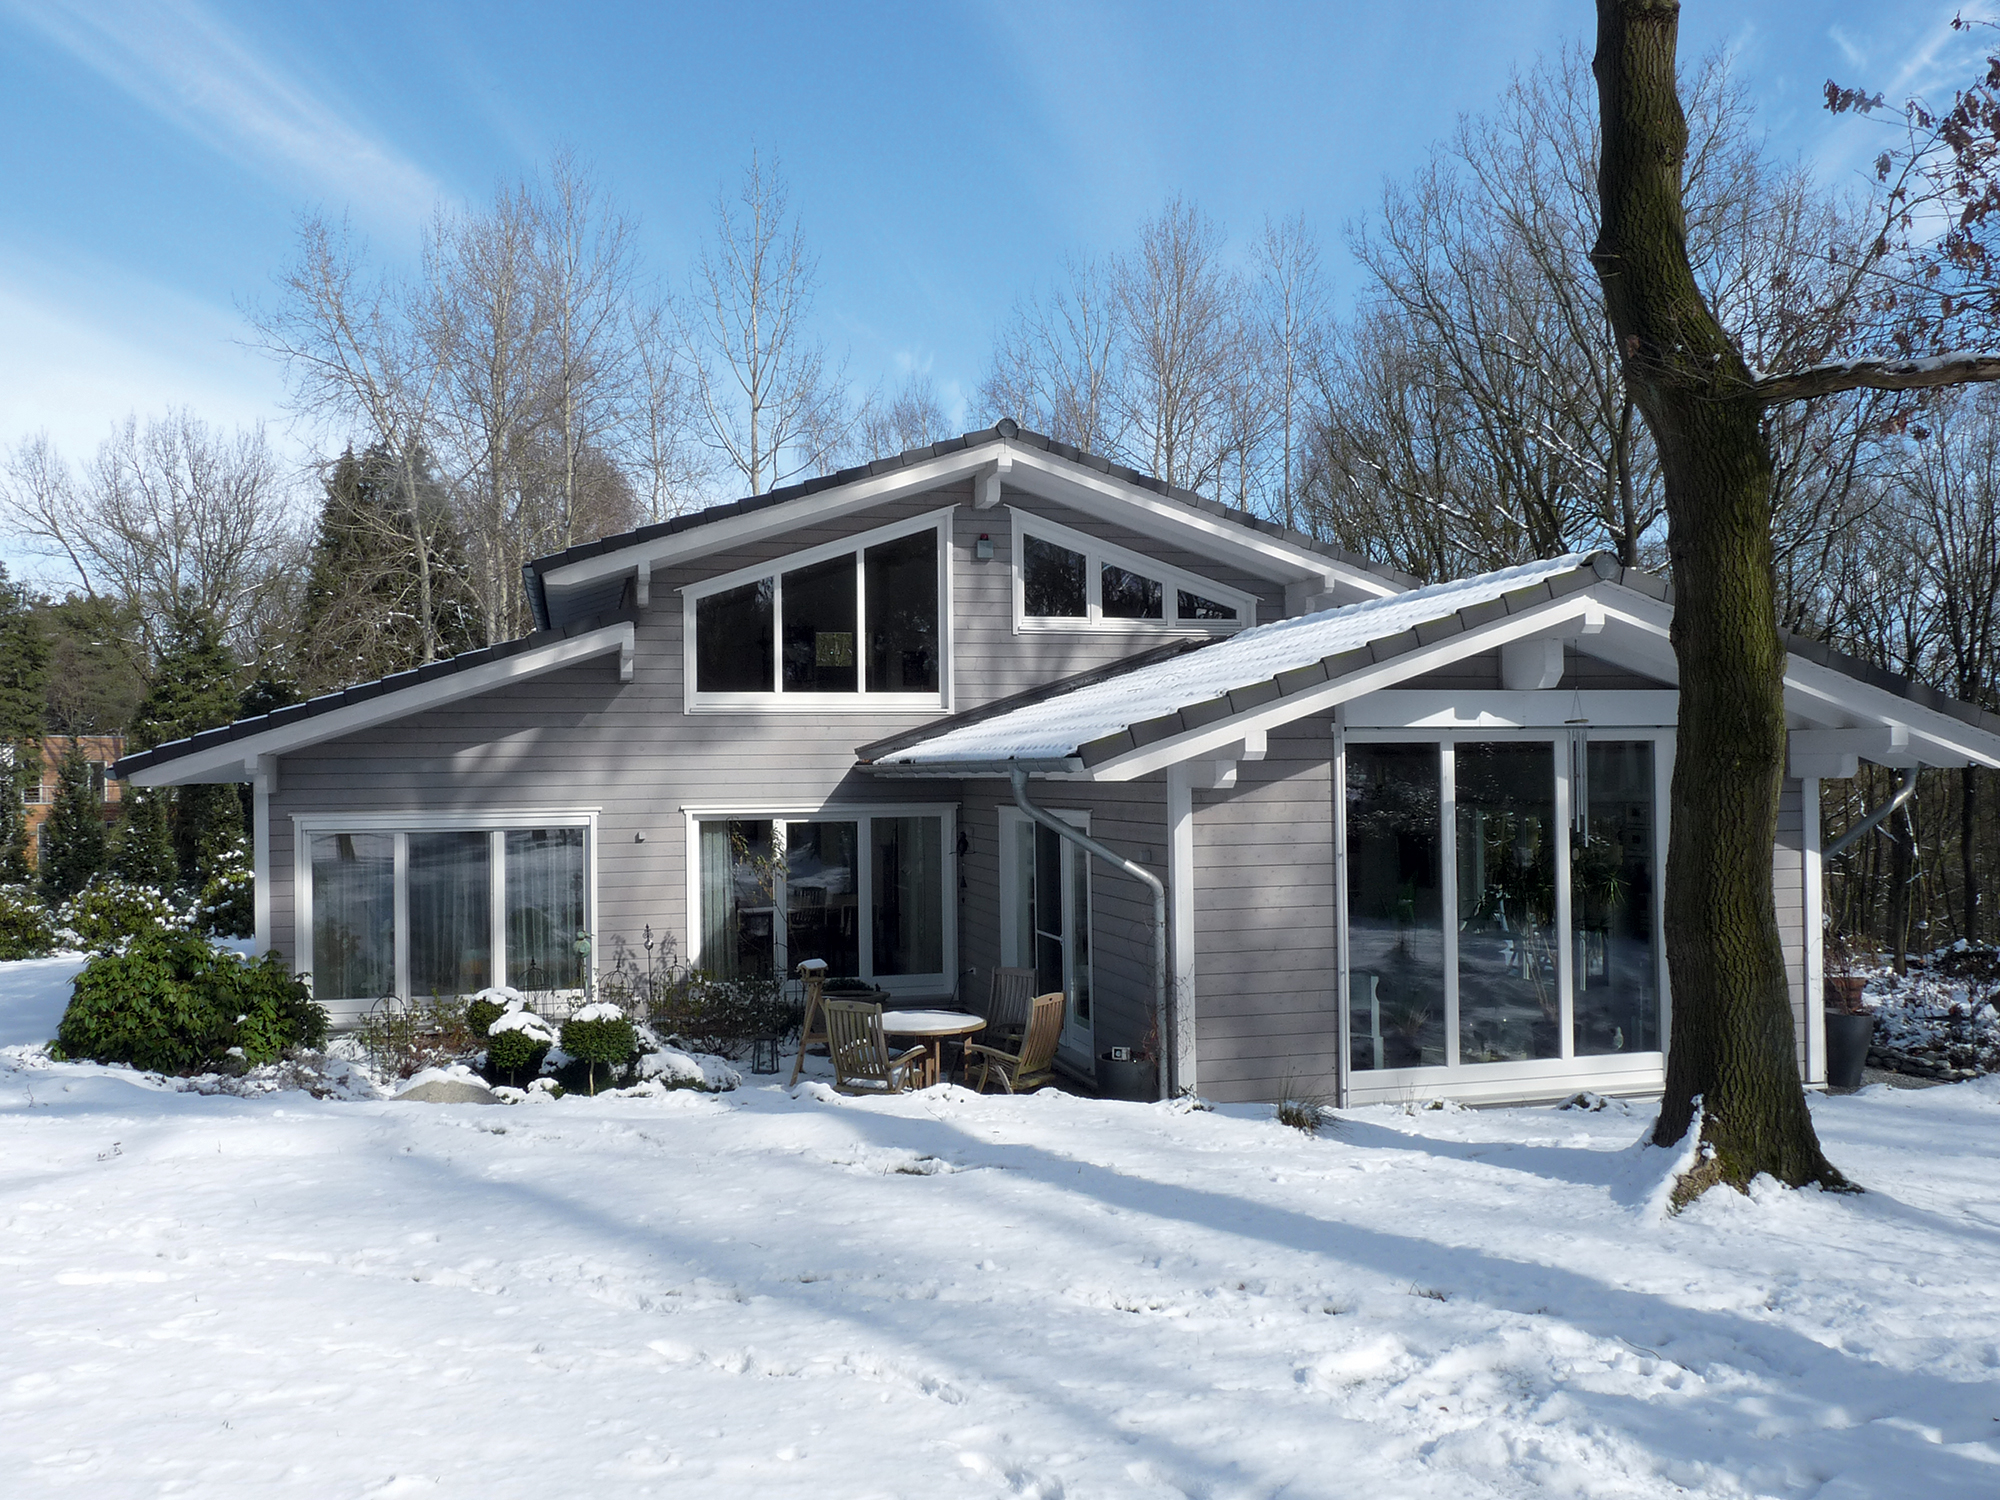 Stommel Haus self build home in the snow